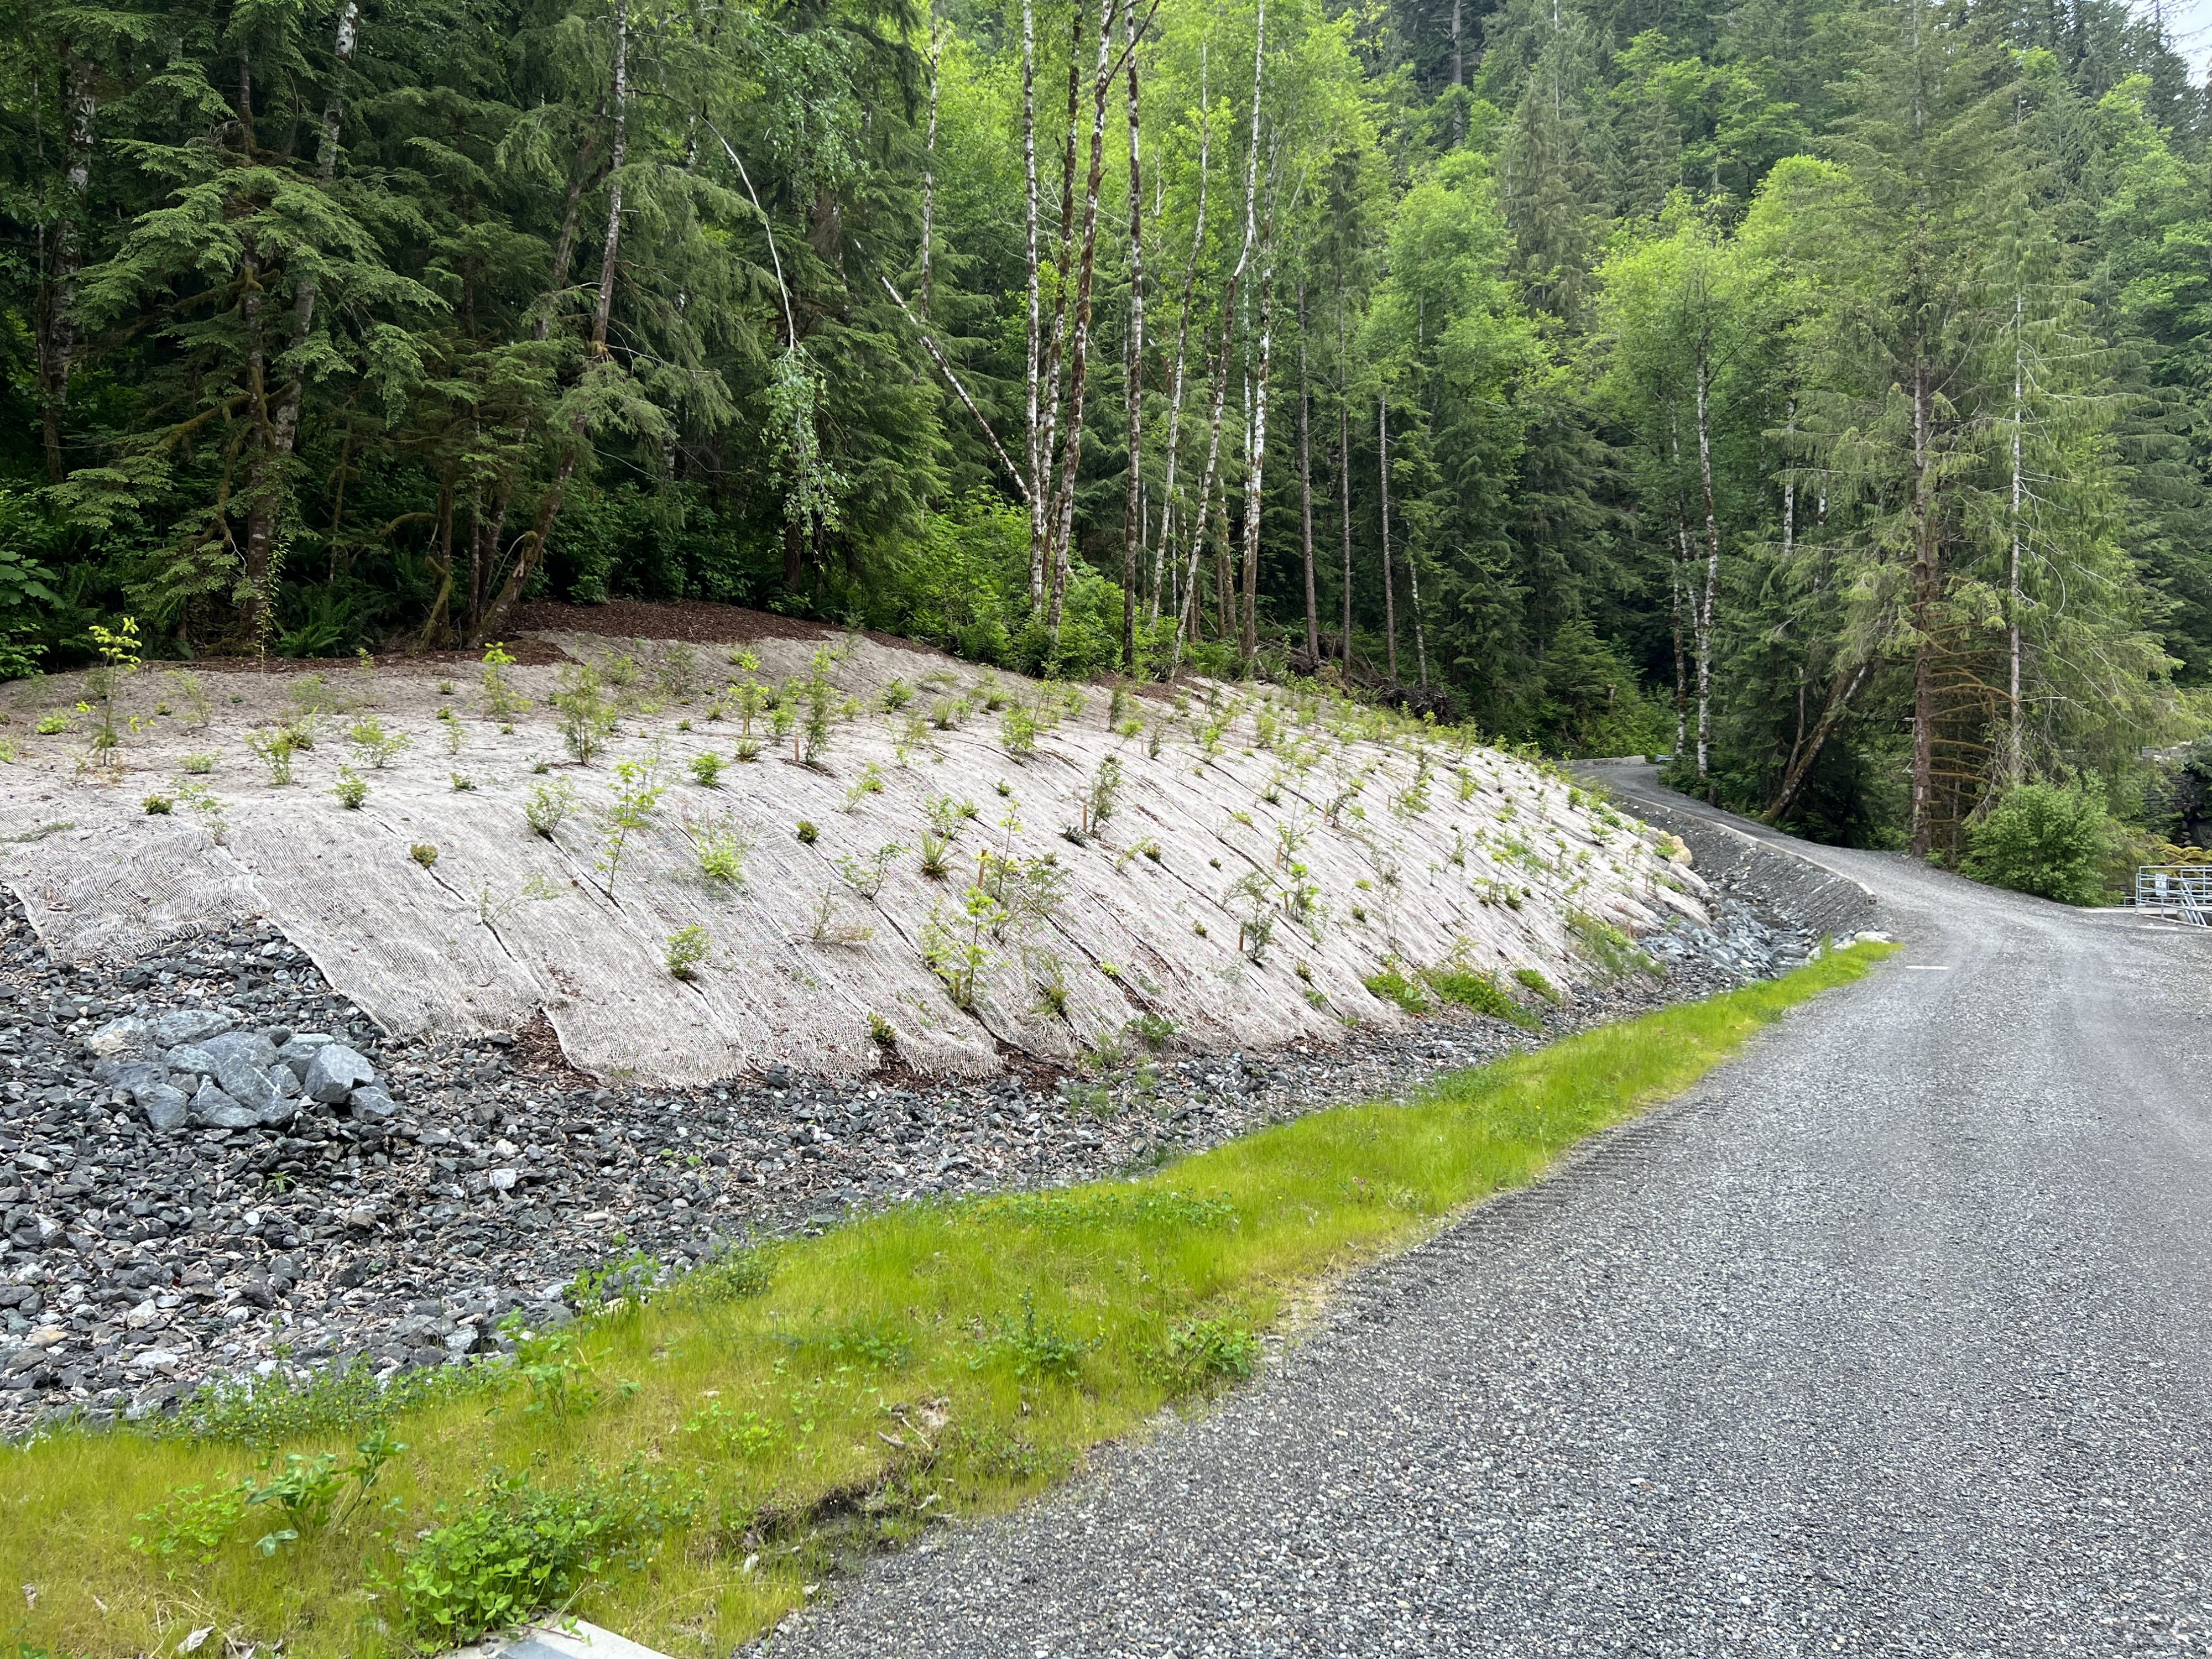 Newly planted plants along a slope adjacent to a gravel road.